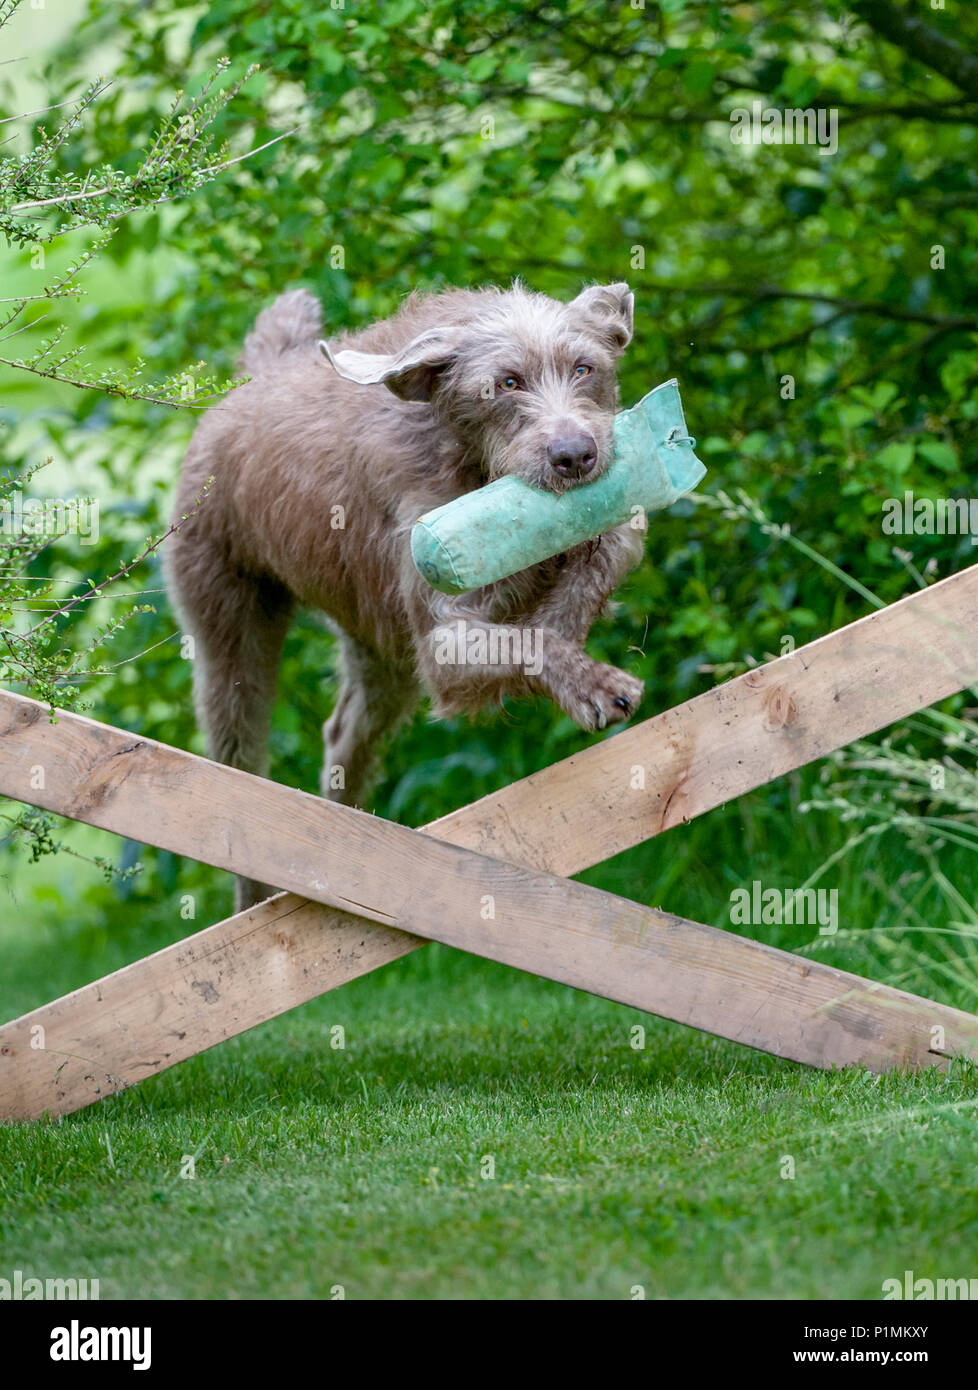 A Slovakian Rough Haired Pointer dog jumping a rail fence, carrying a training dummy, during a dog training class on a summers afternoon Stock Photo